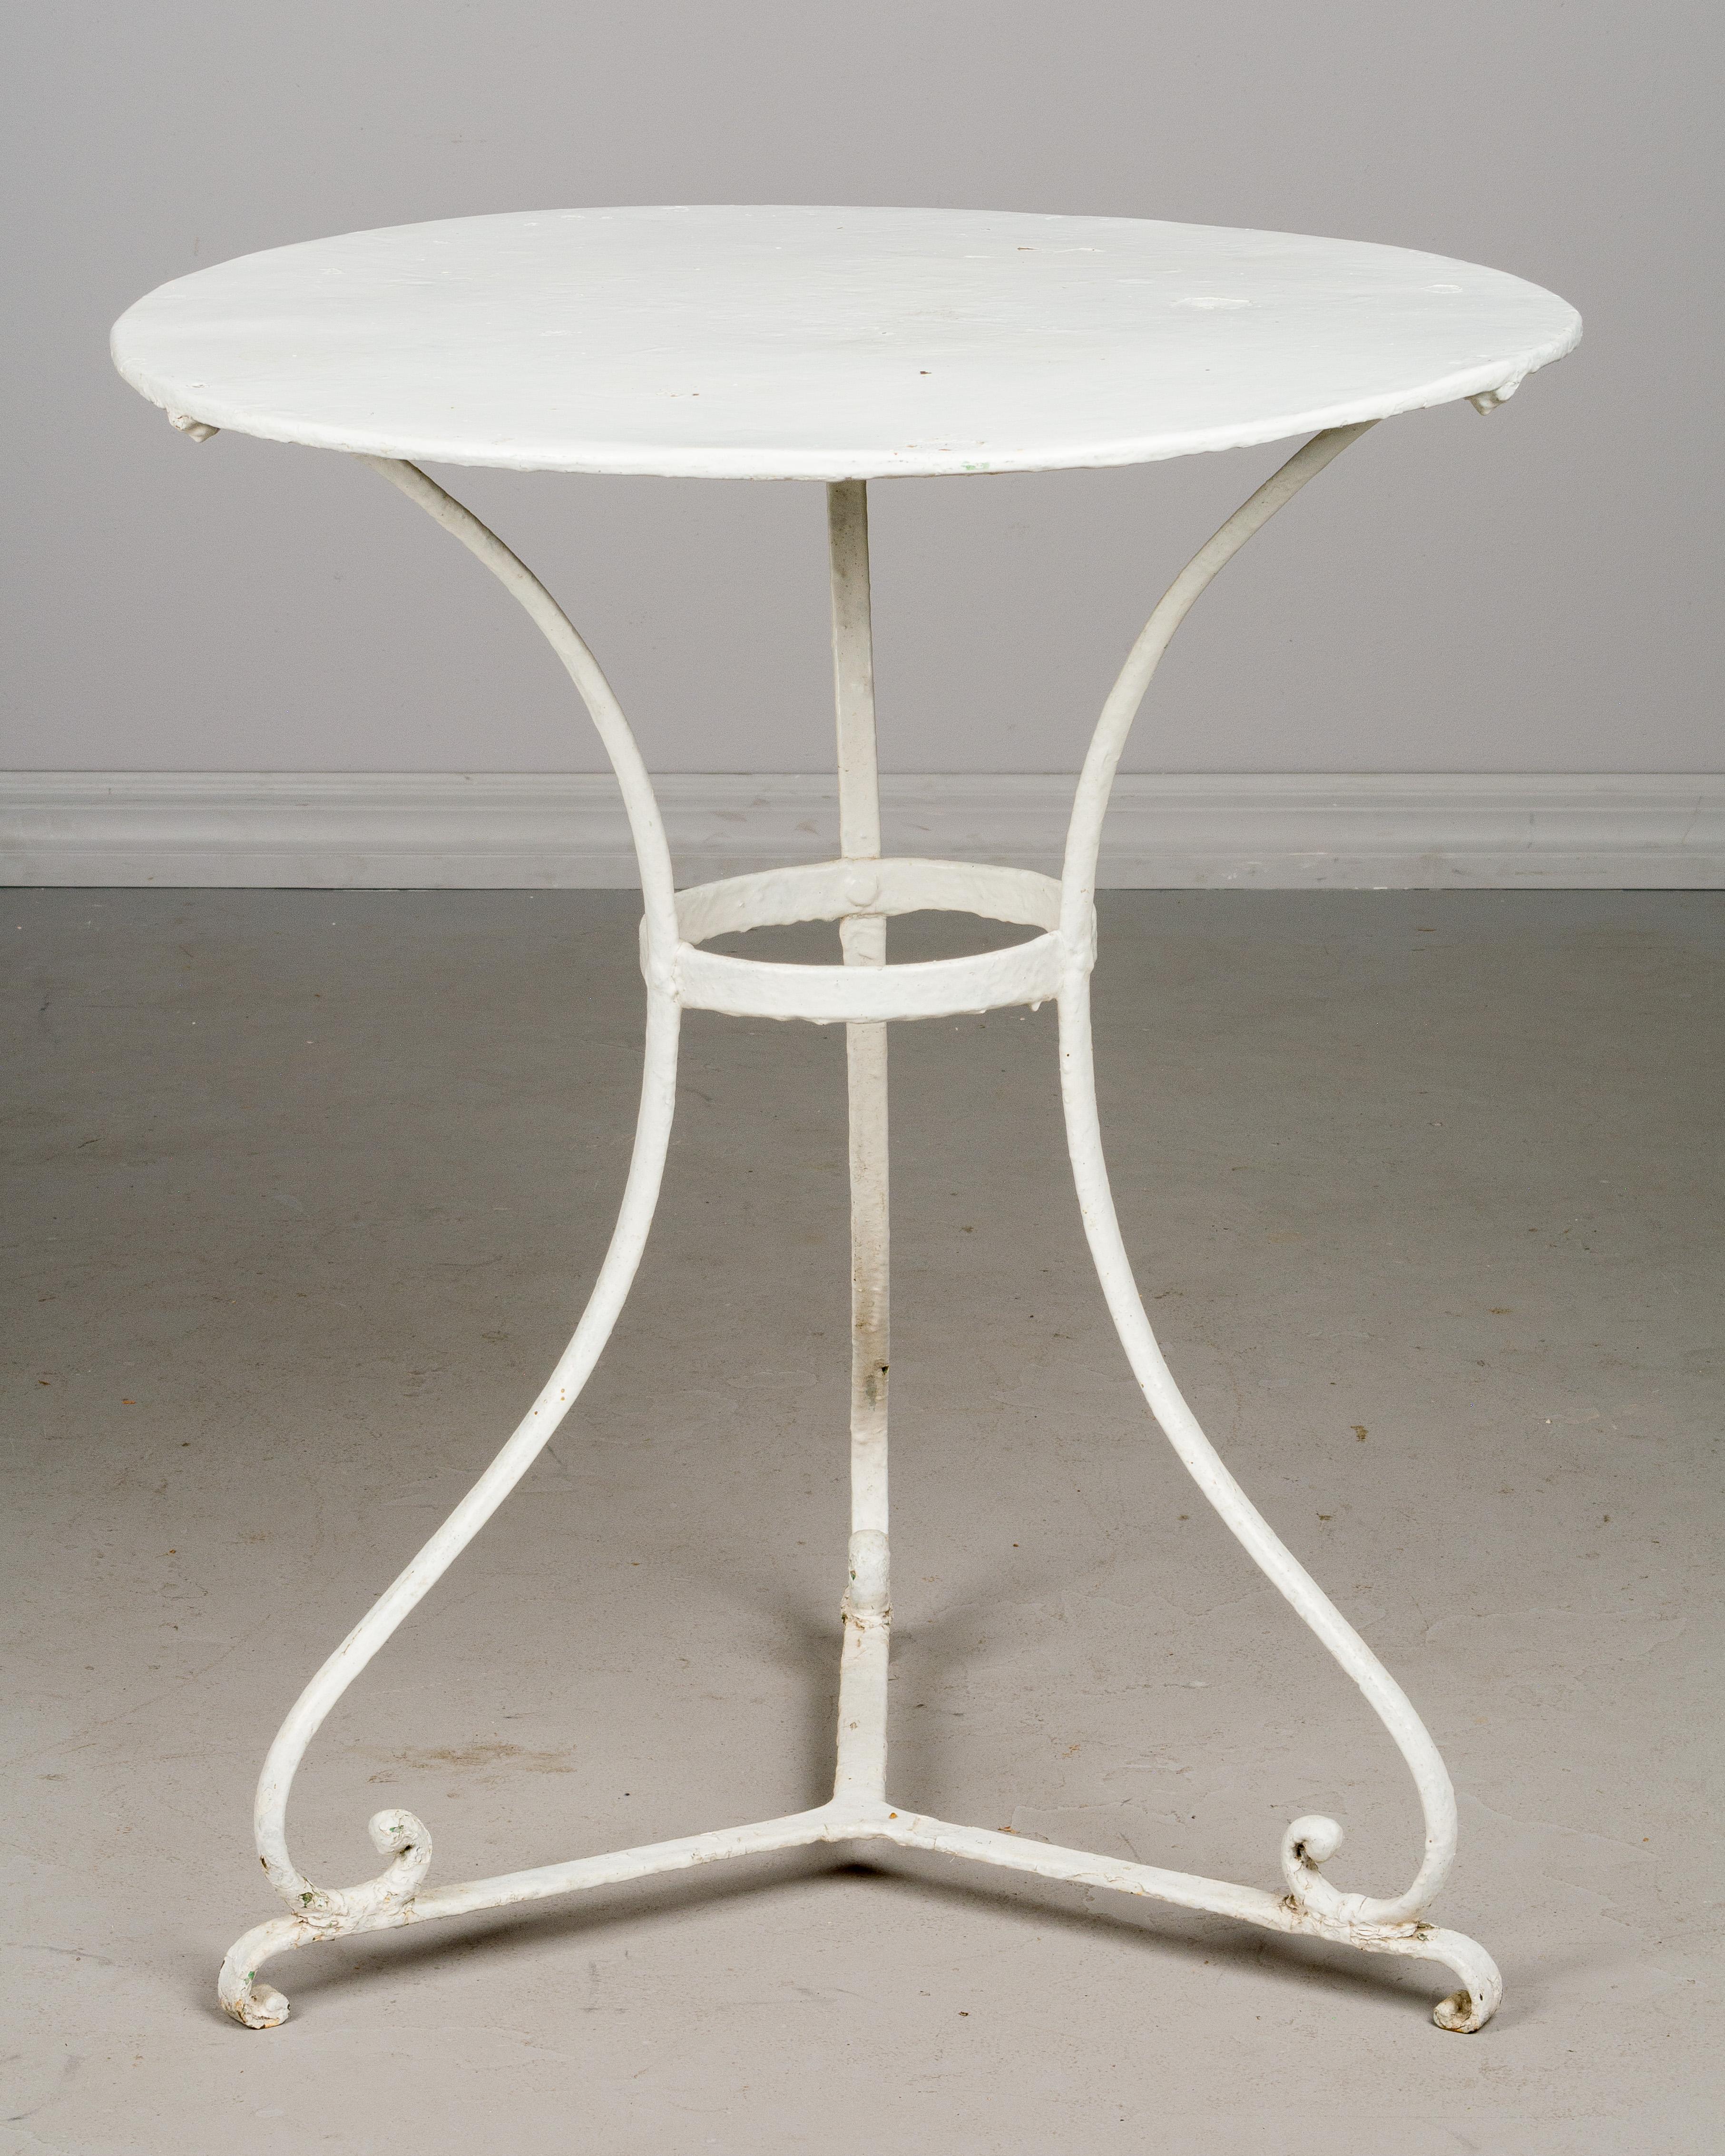 A late 19th century French wrought iron bistro table with old white painted patina and tole top.